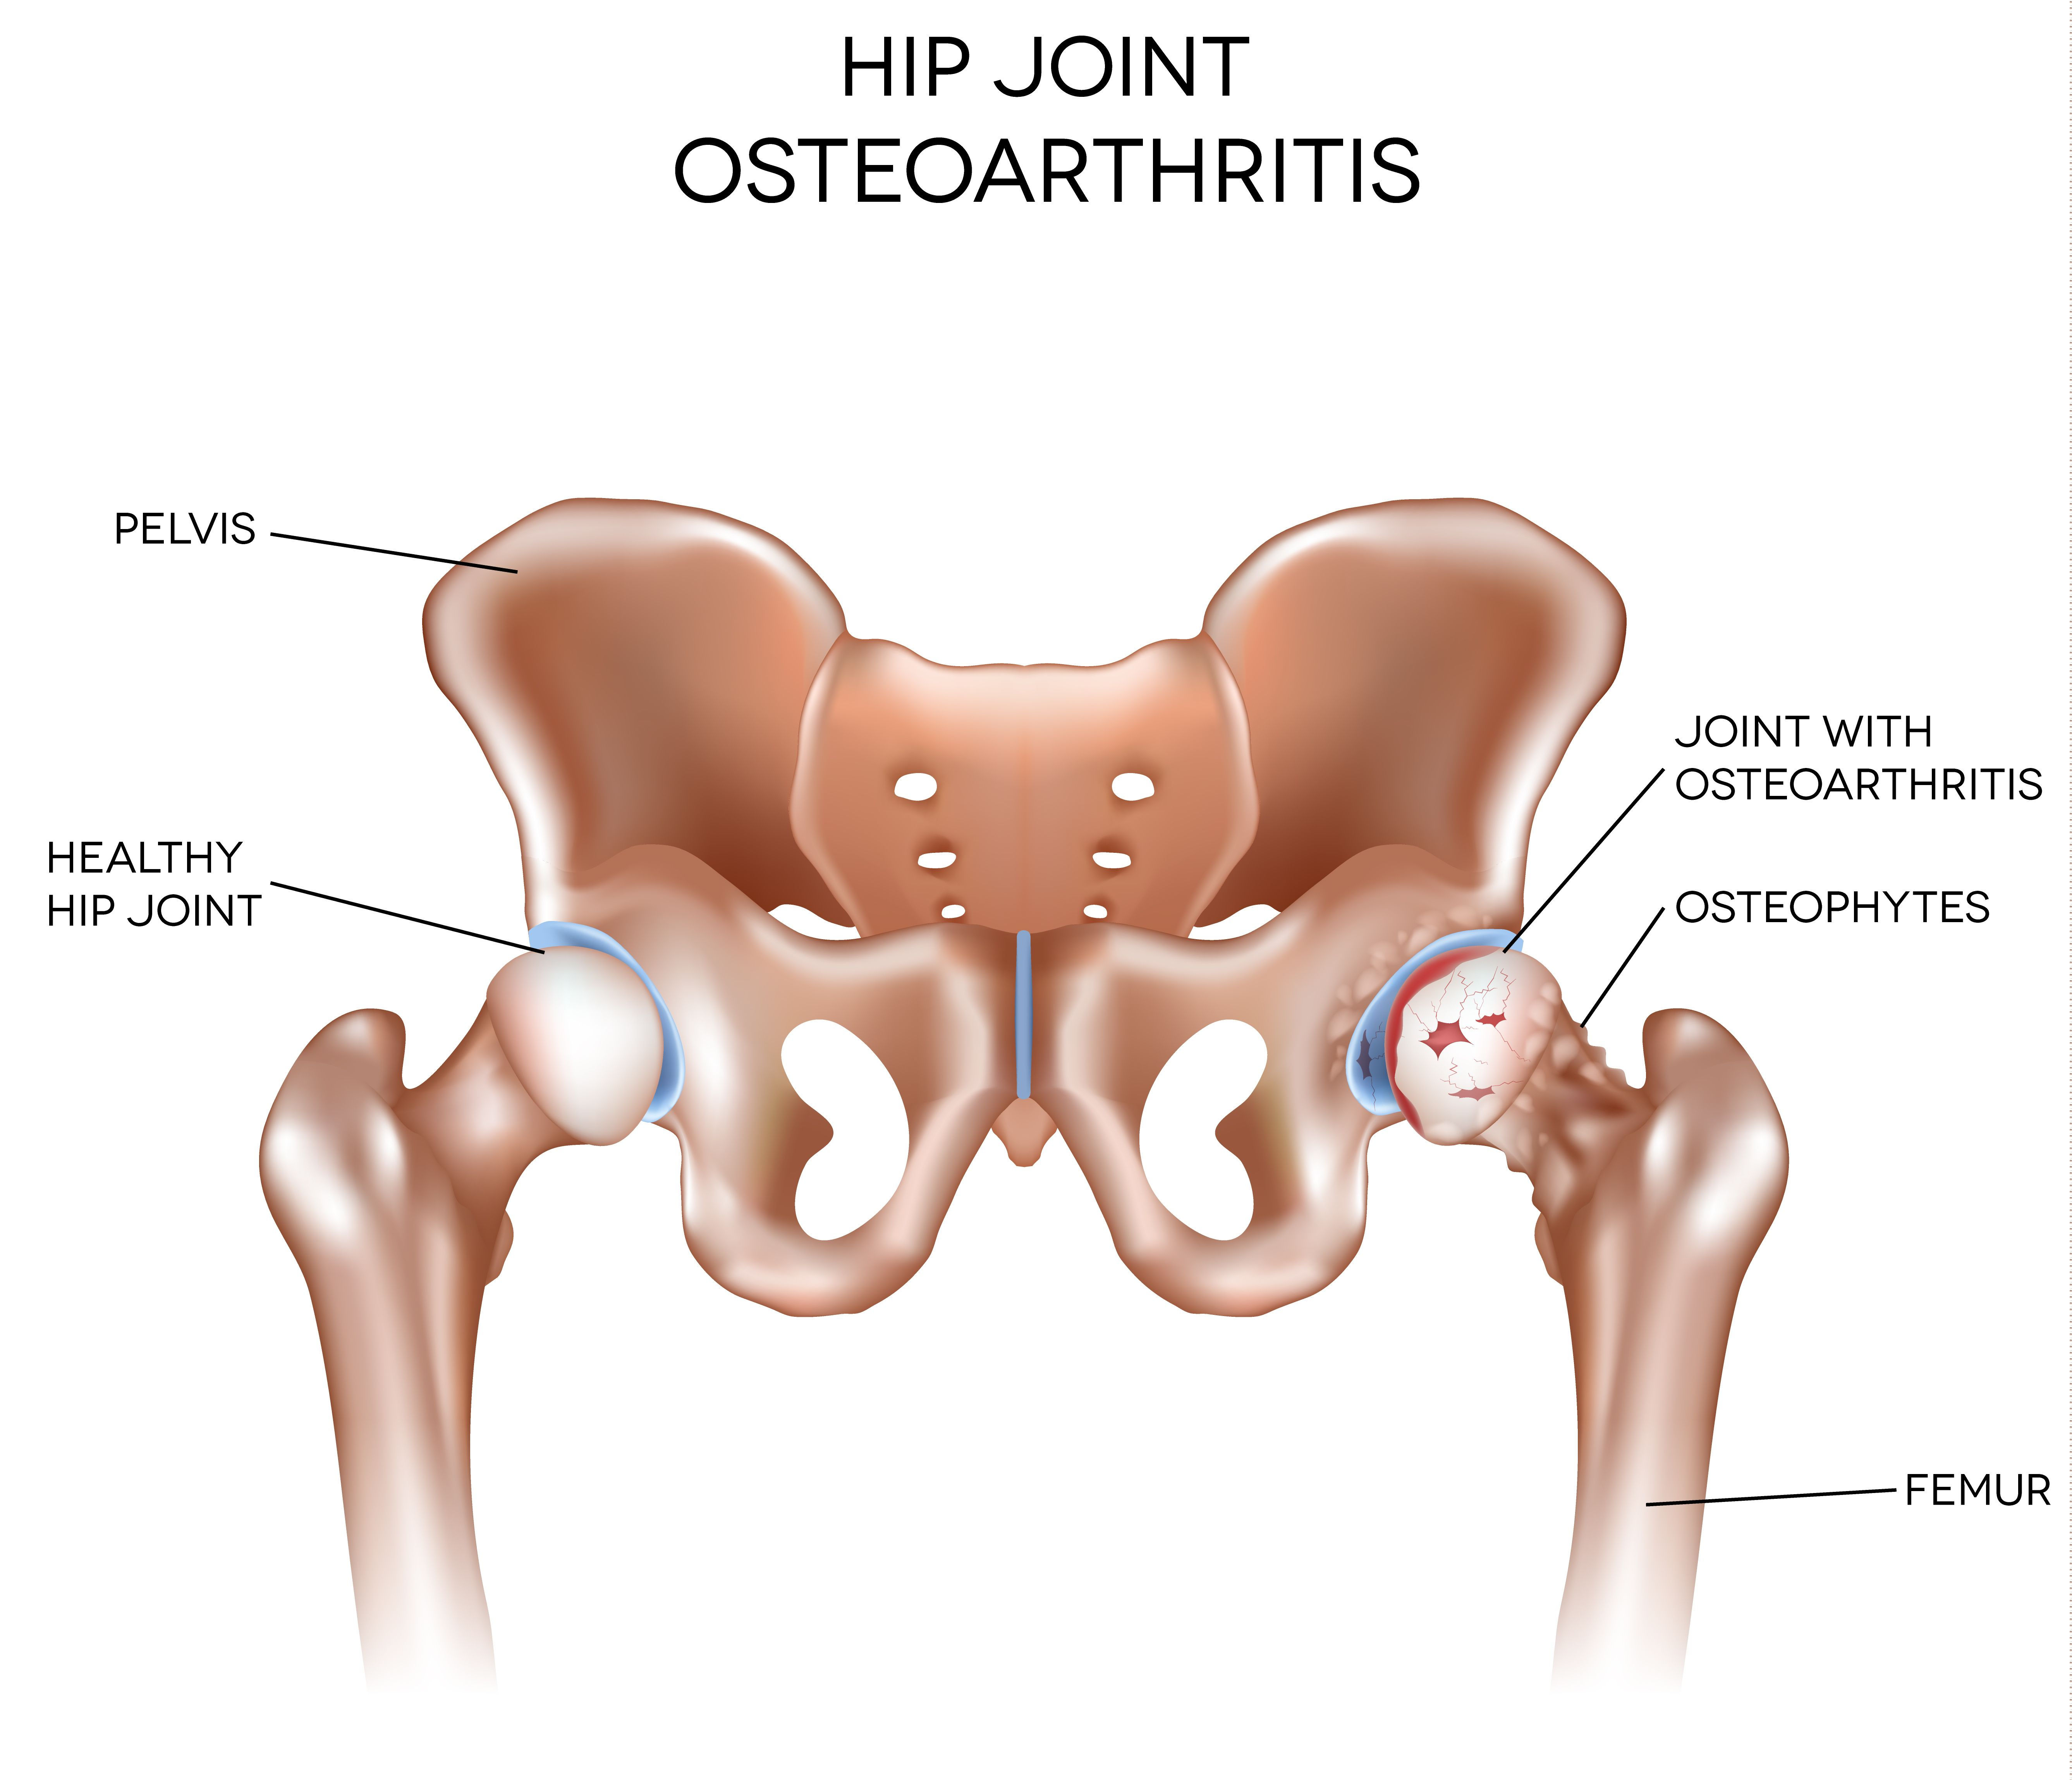 A diagram of the hip showing a healthy joint and a joint with osteoarthritis.